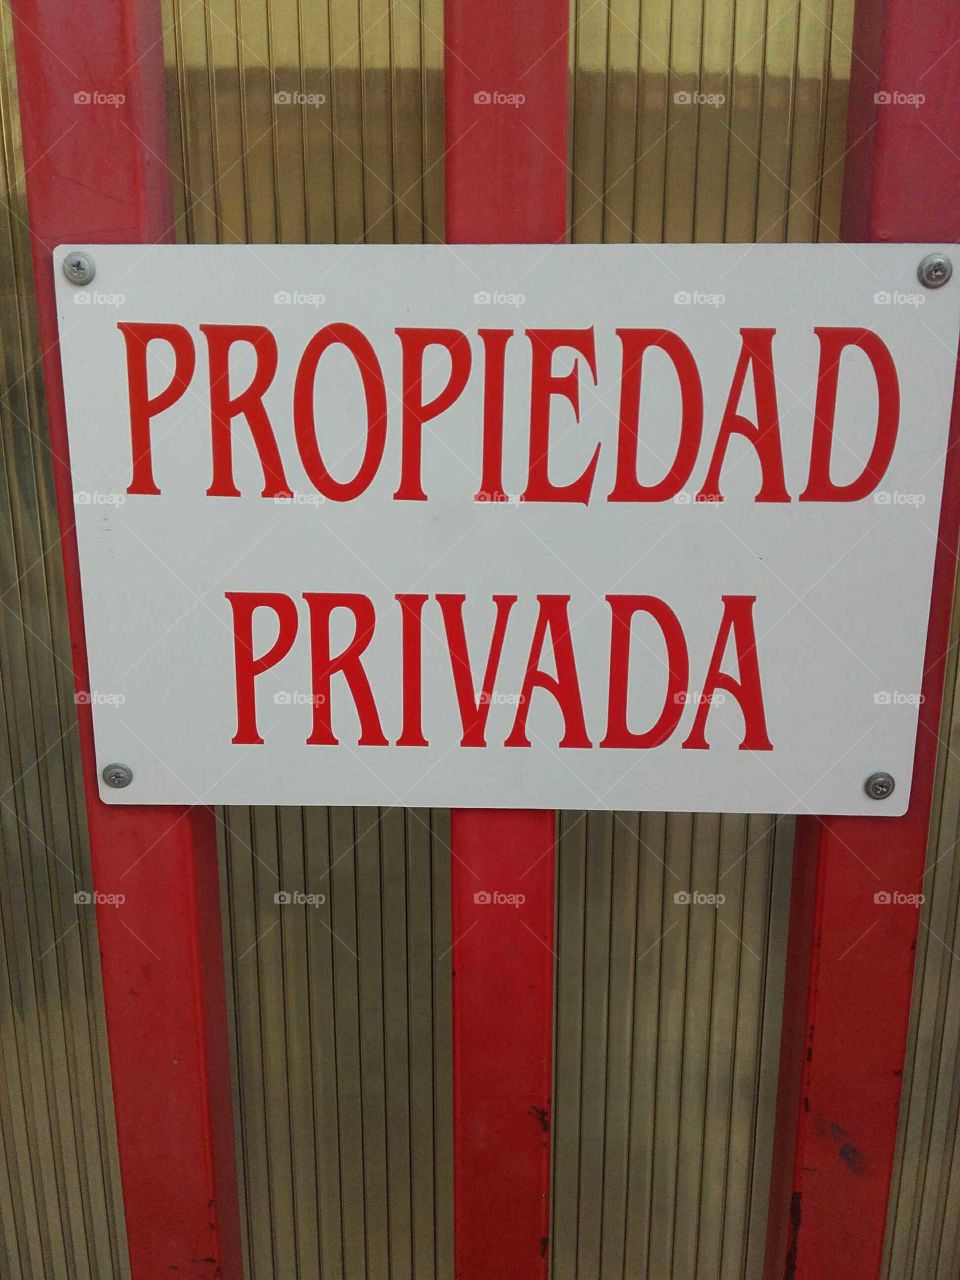 Private property sign in spanish